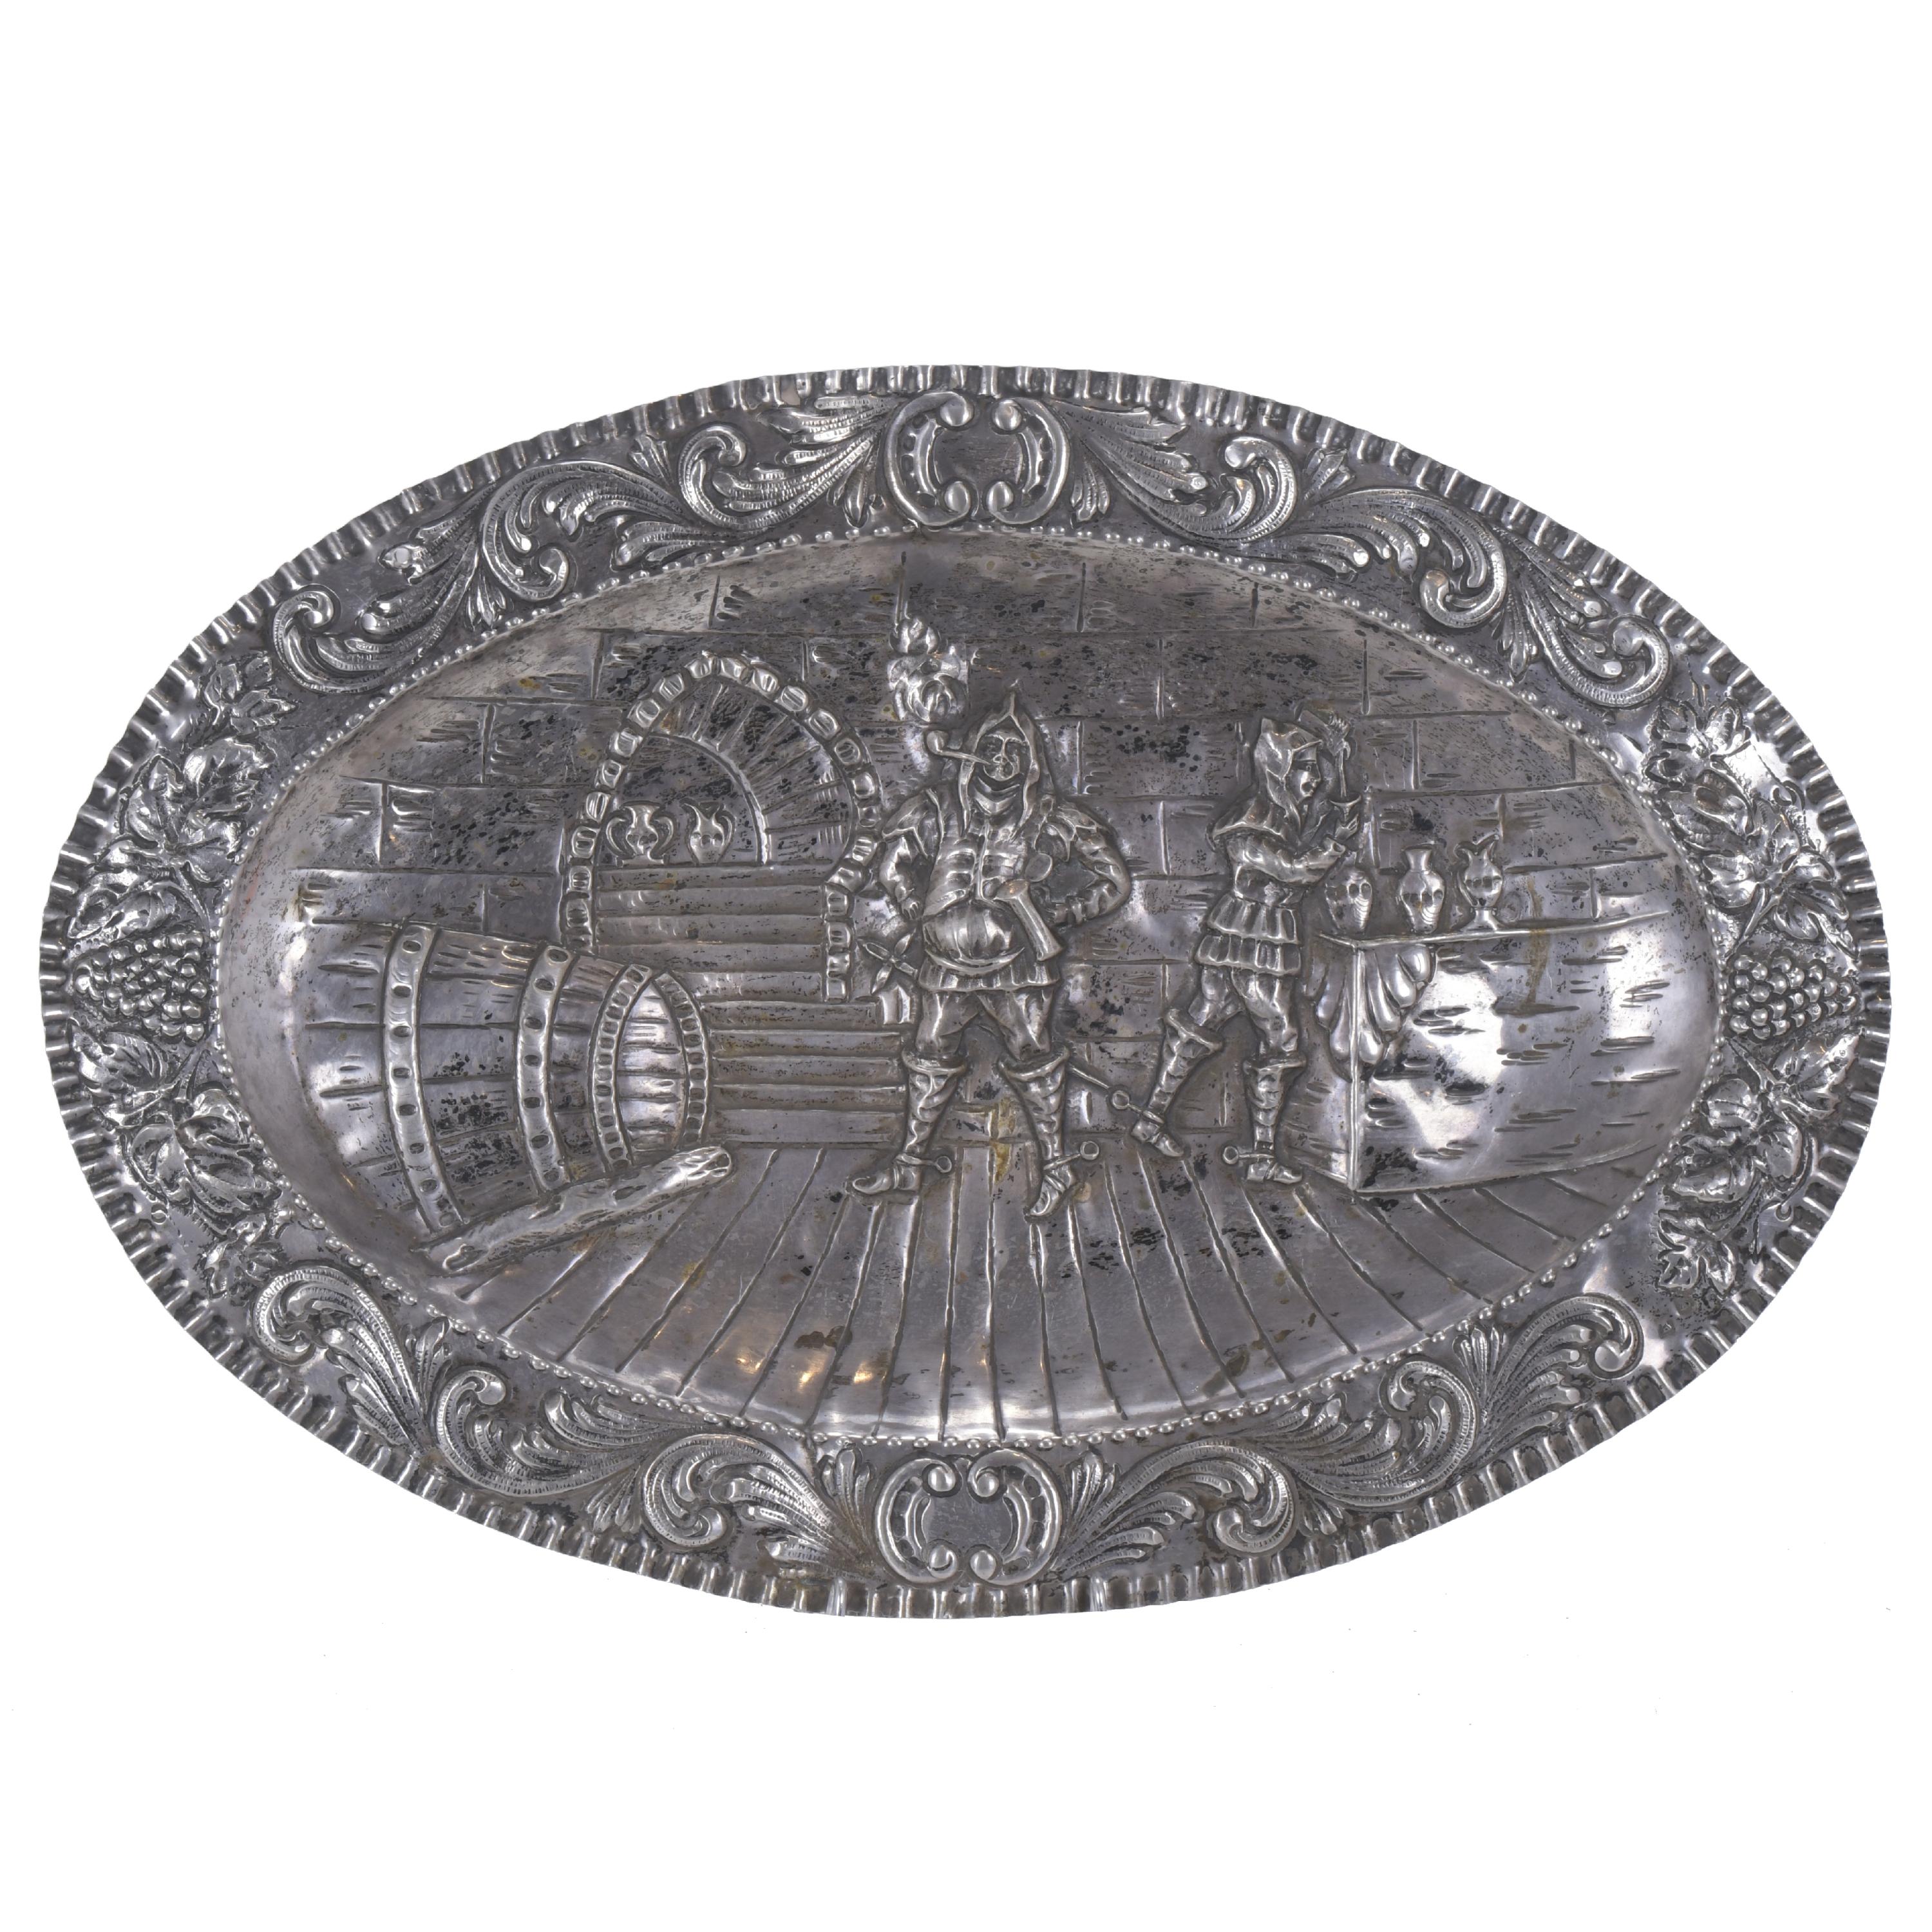 EMBOSSED SILVER TRAY.